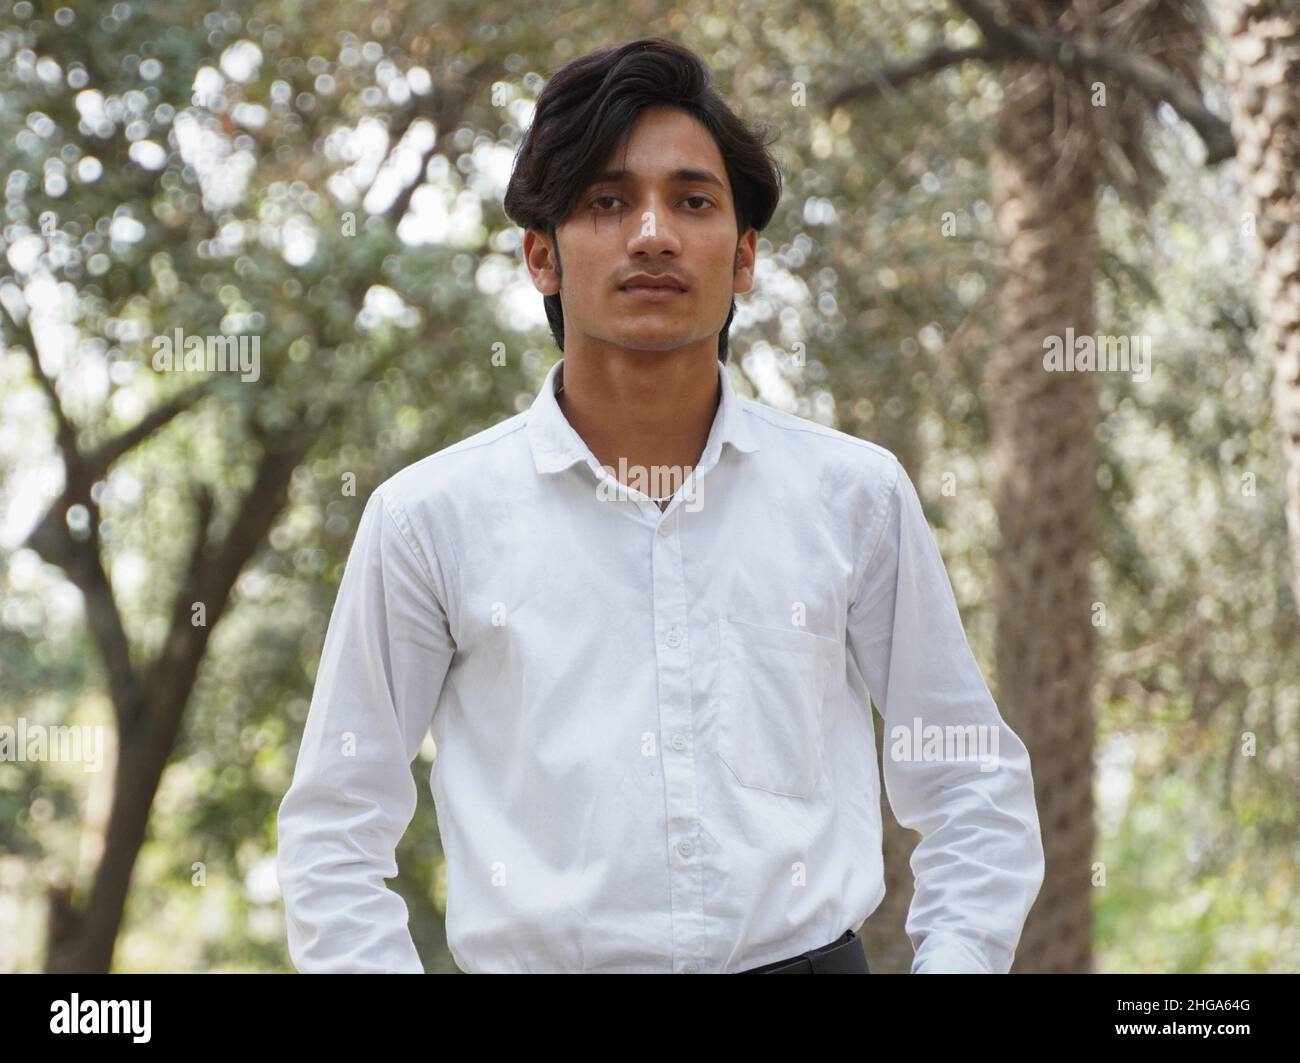 indian young handsome man at outdoor shoot image Stock Photo